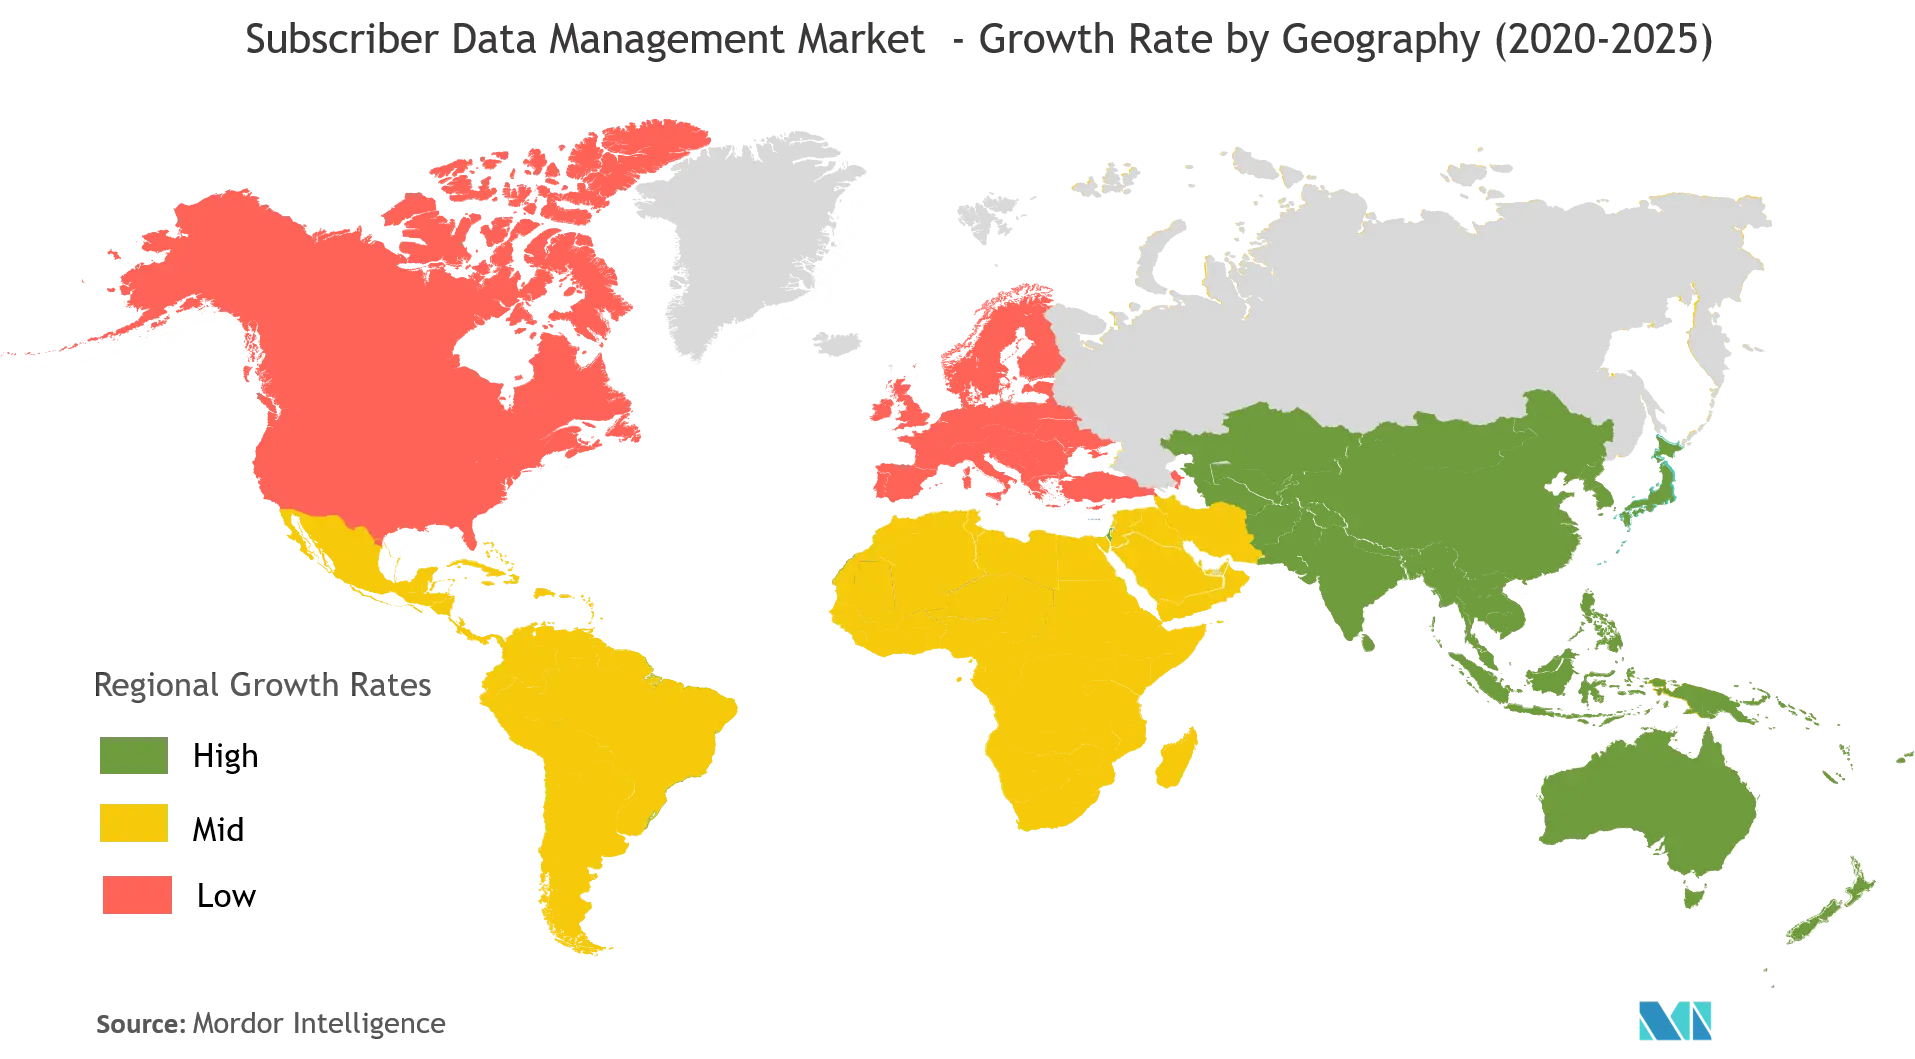 Subscriber Data Management Market : Growth Rate by Geography (2020-2025)